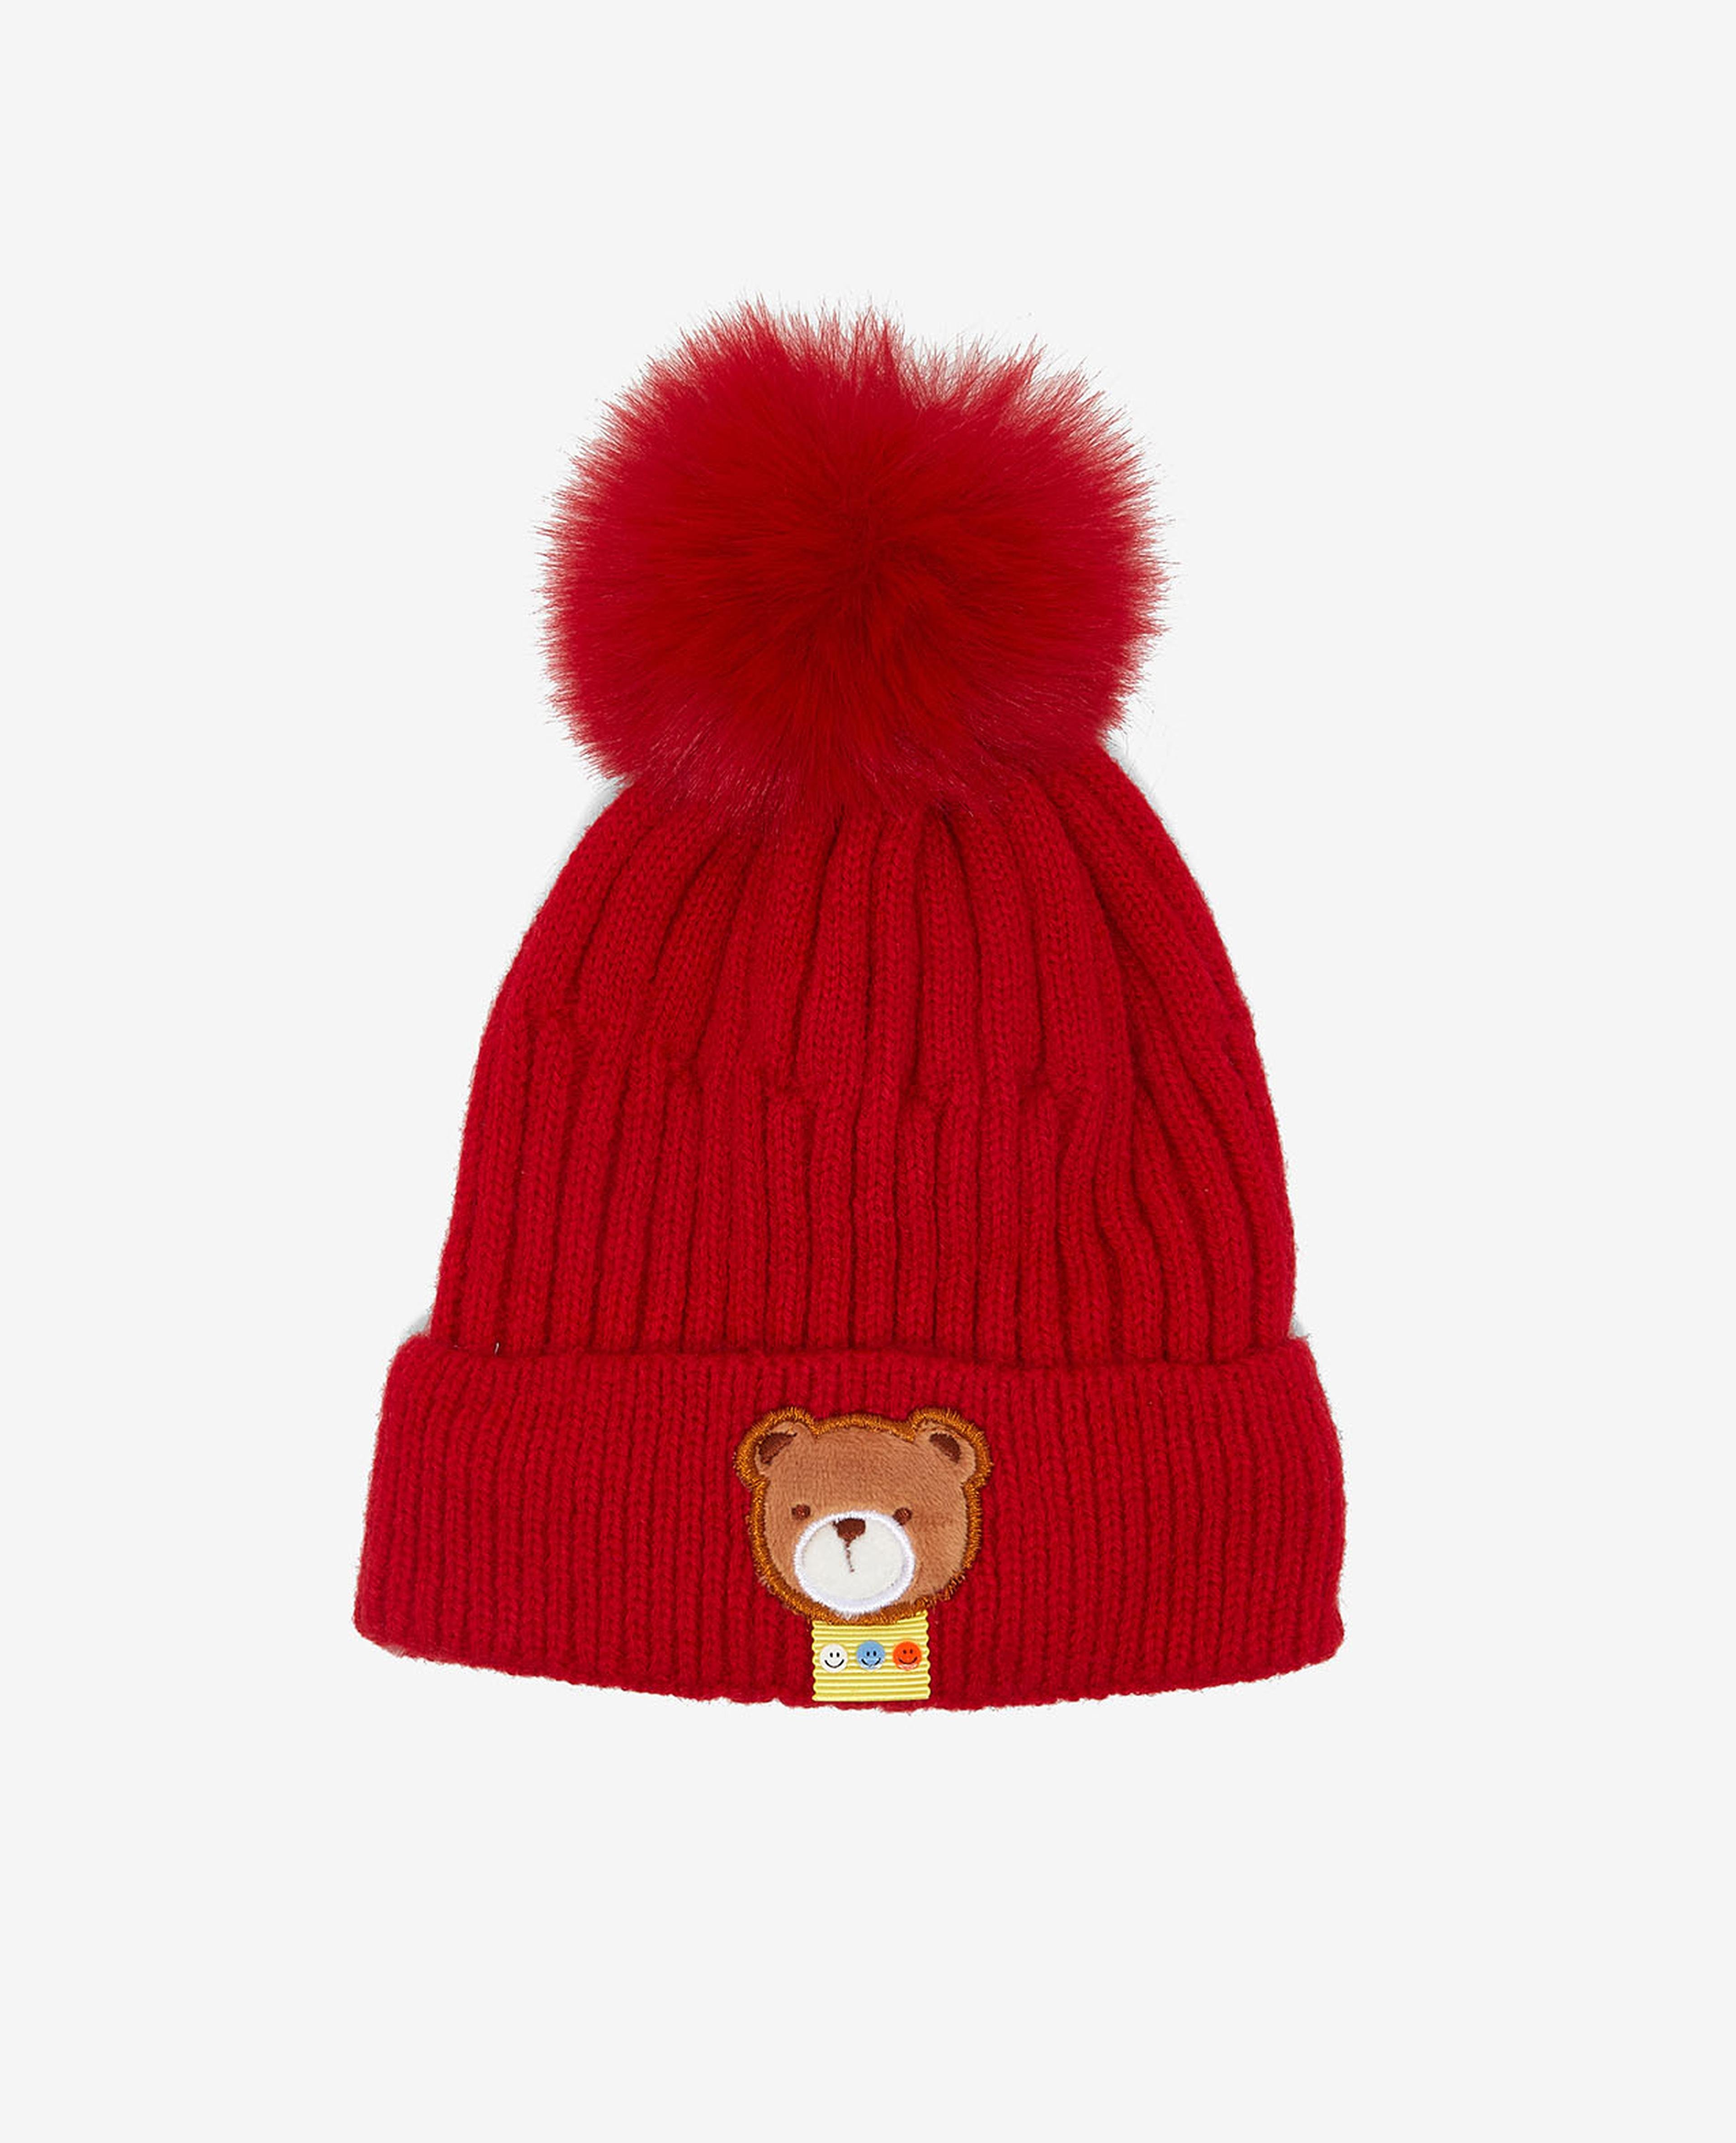 Embroidered Knitted Pom-Pom Beanie Cap